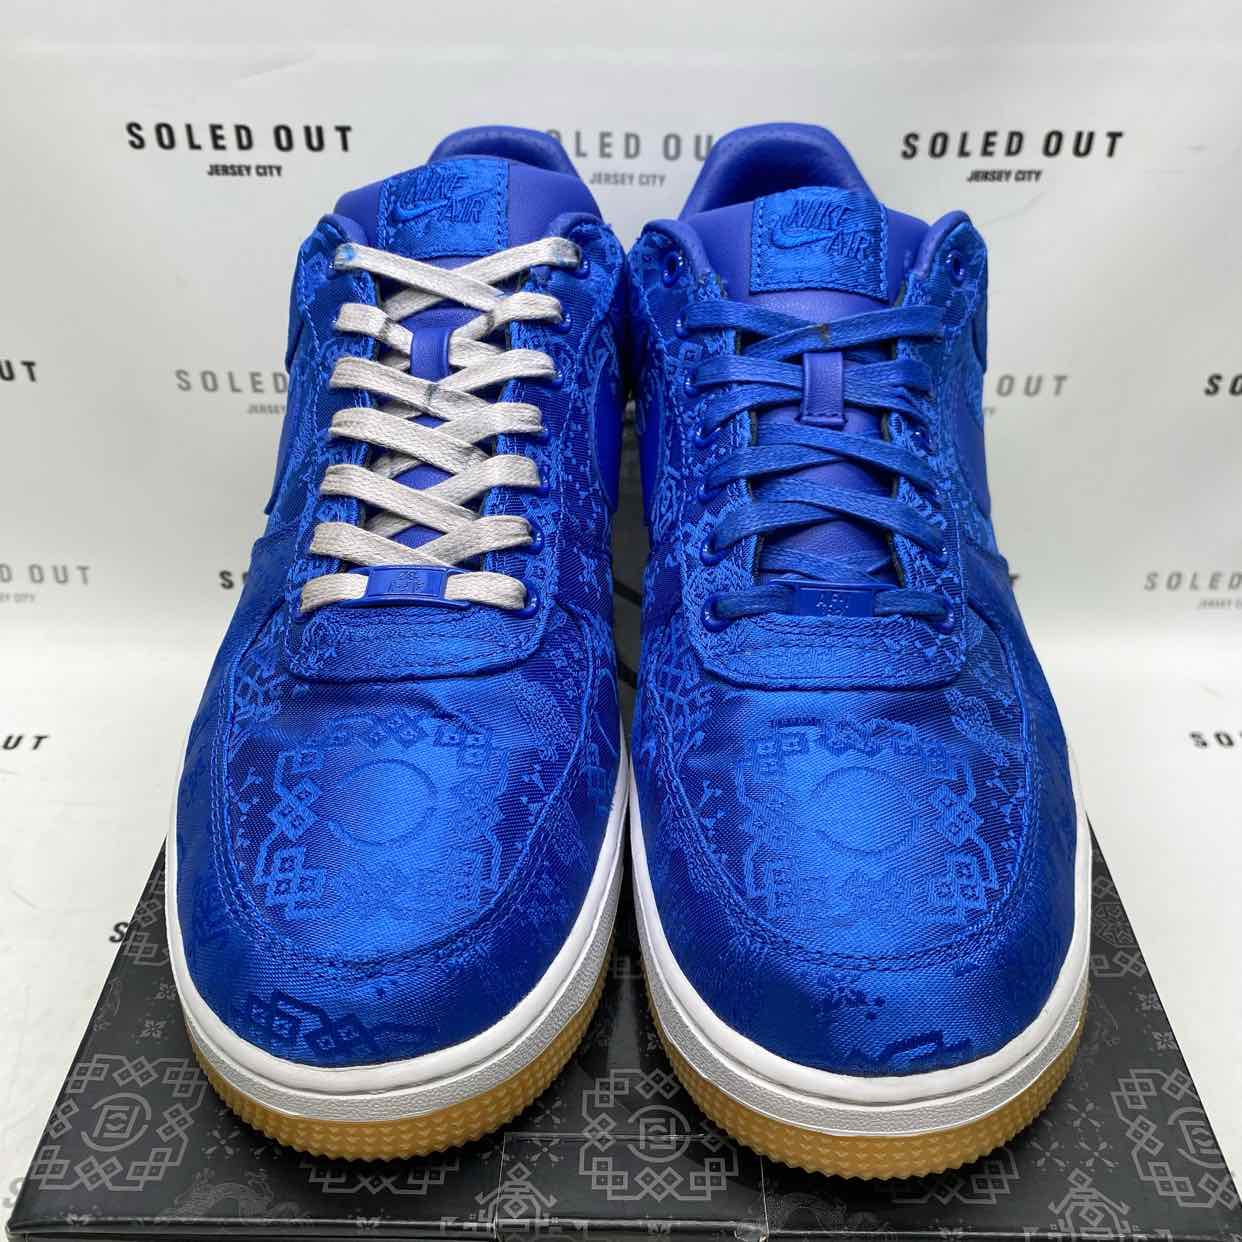 Nike Air Force 1 Low "Blue Silk Clot" 2019 Used Size 11